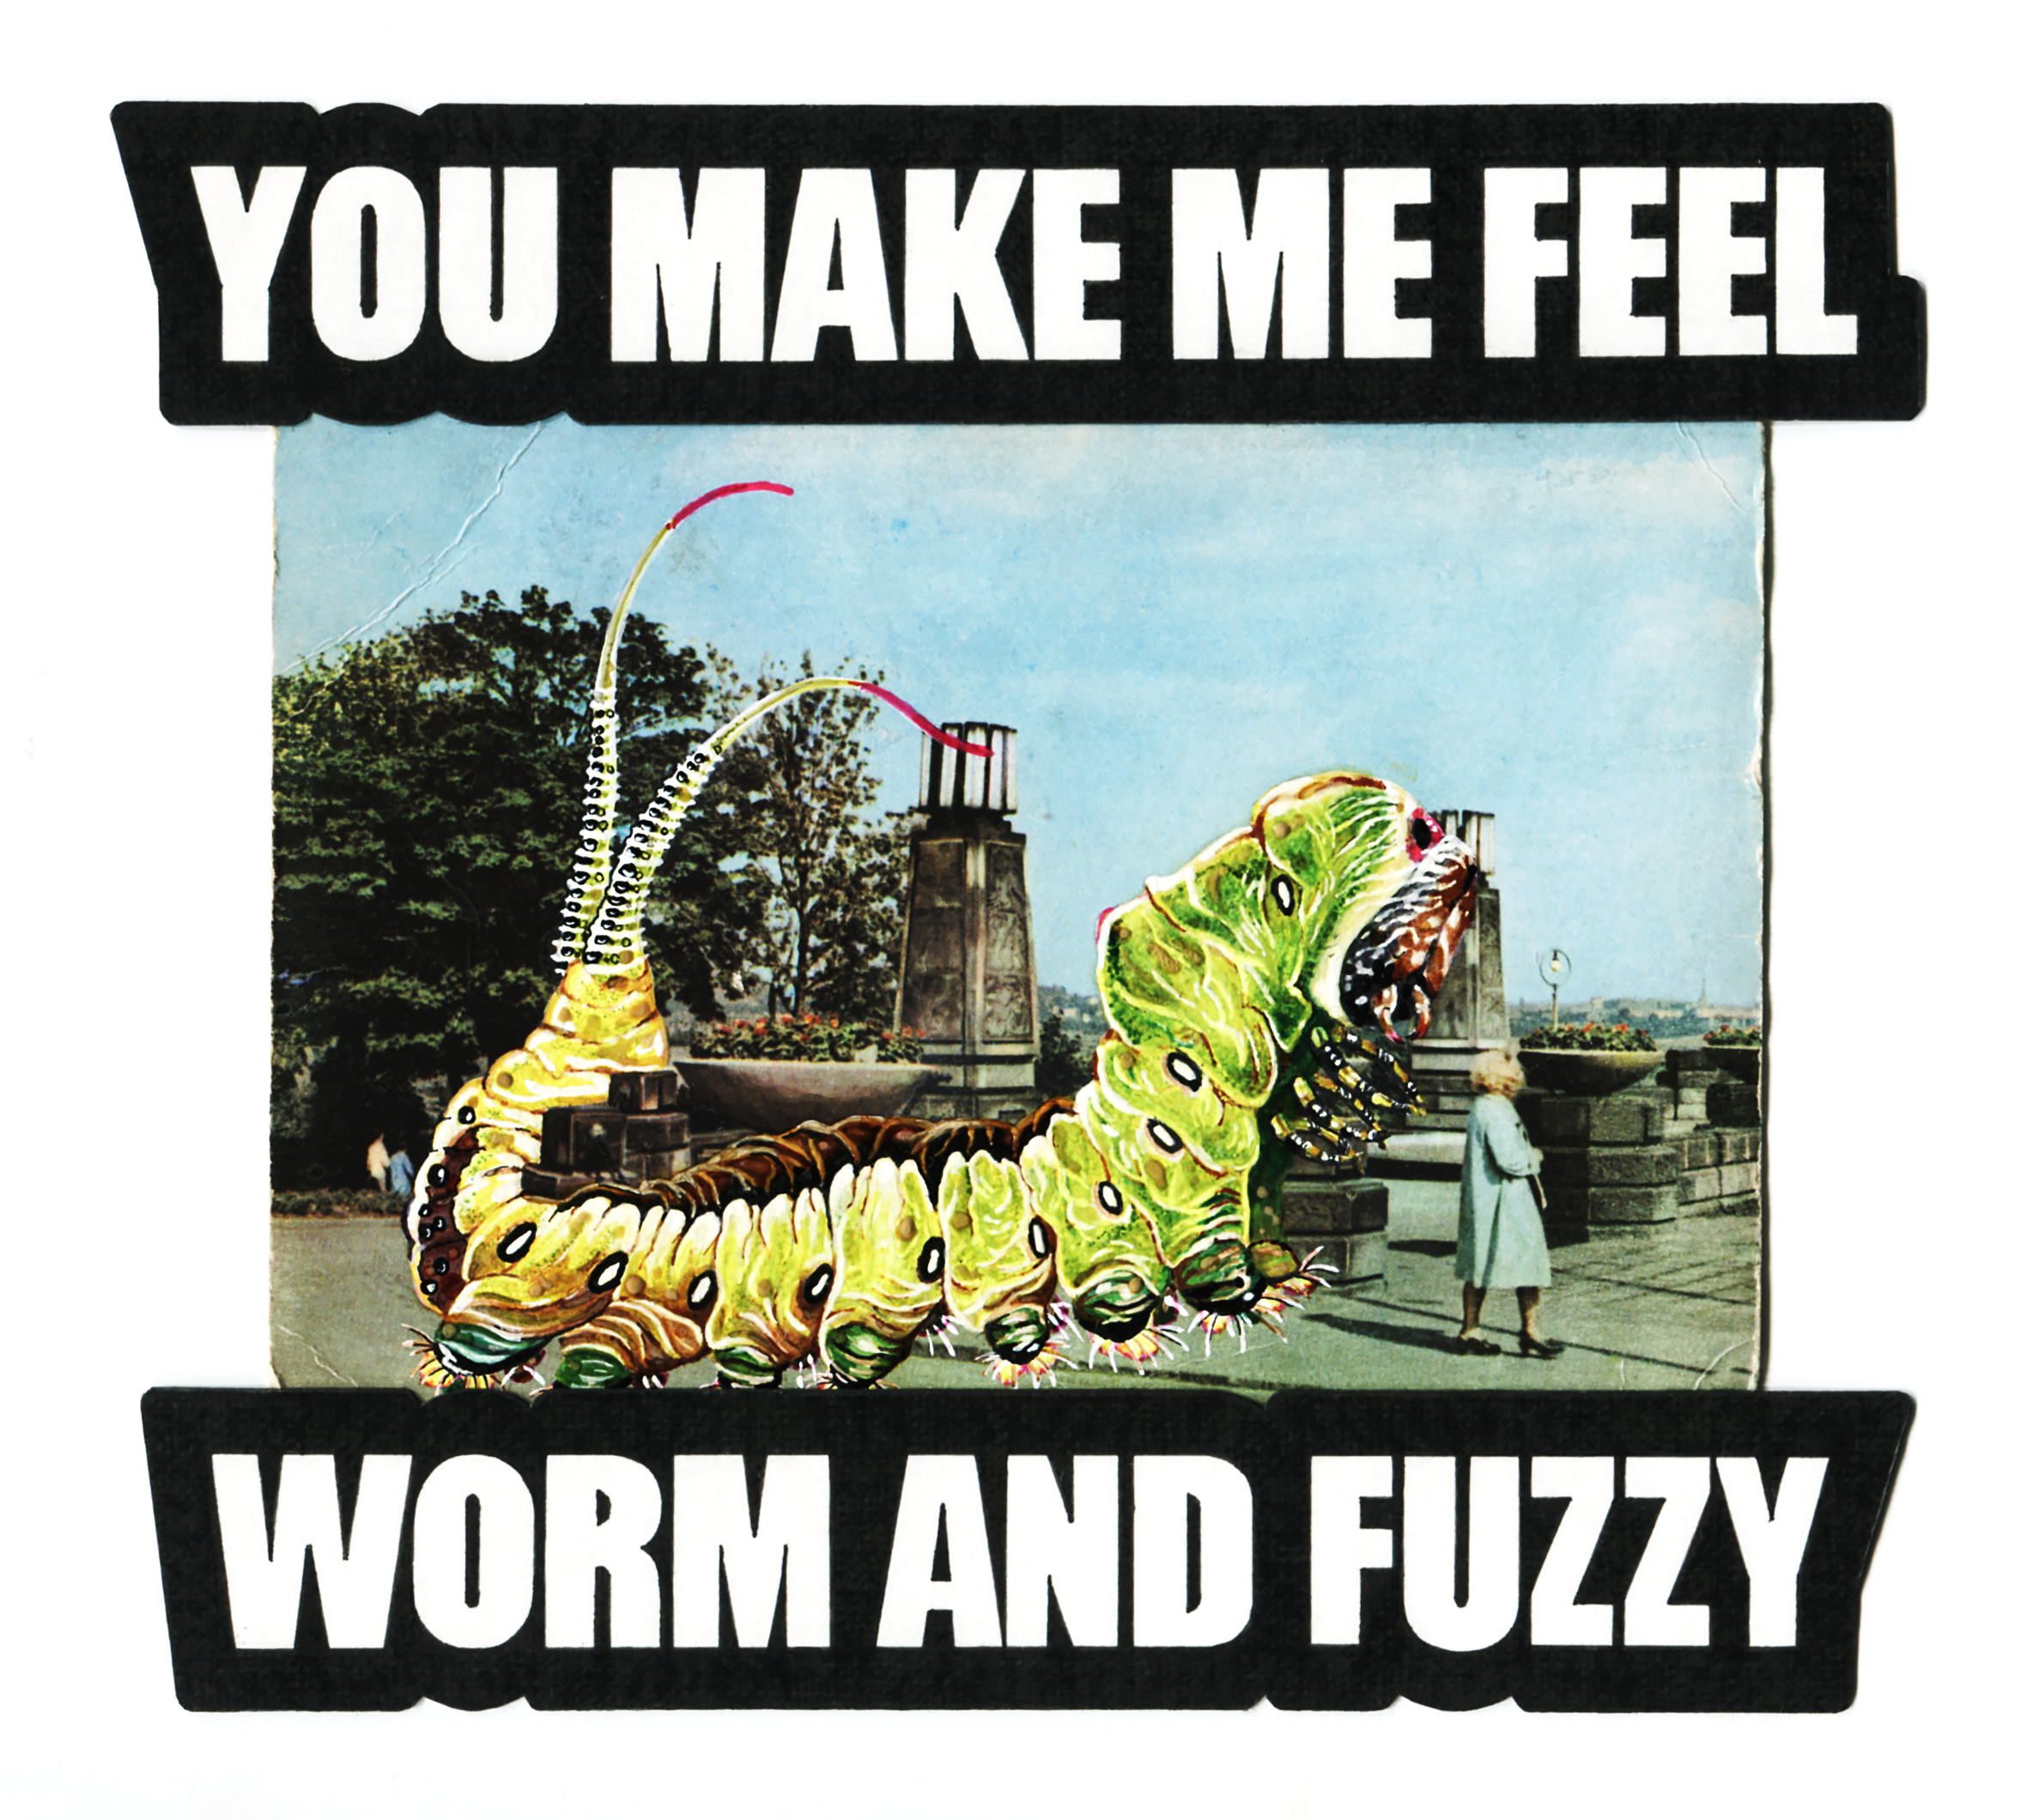 You make me feel worm and fuzzy